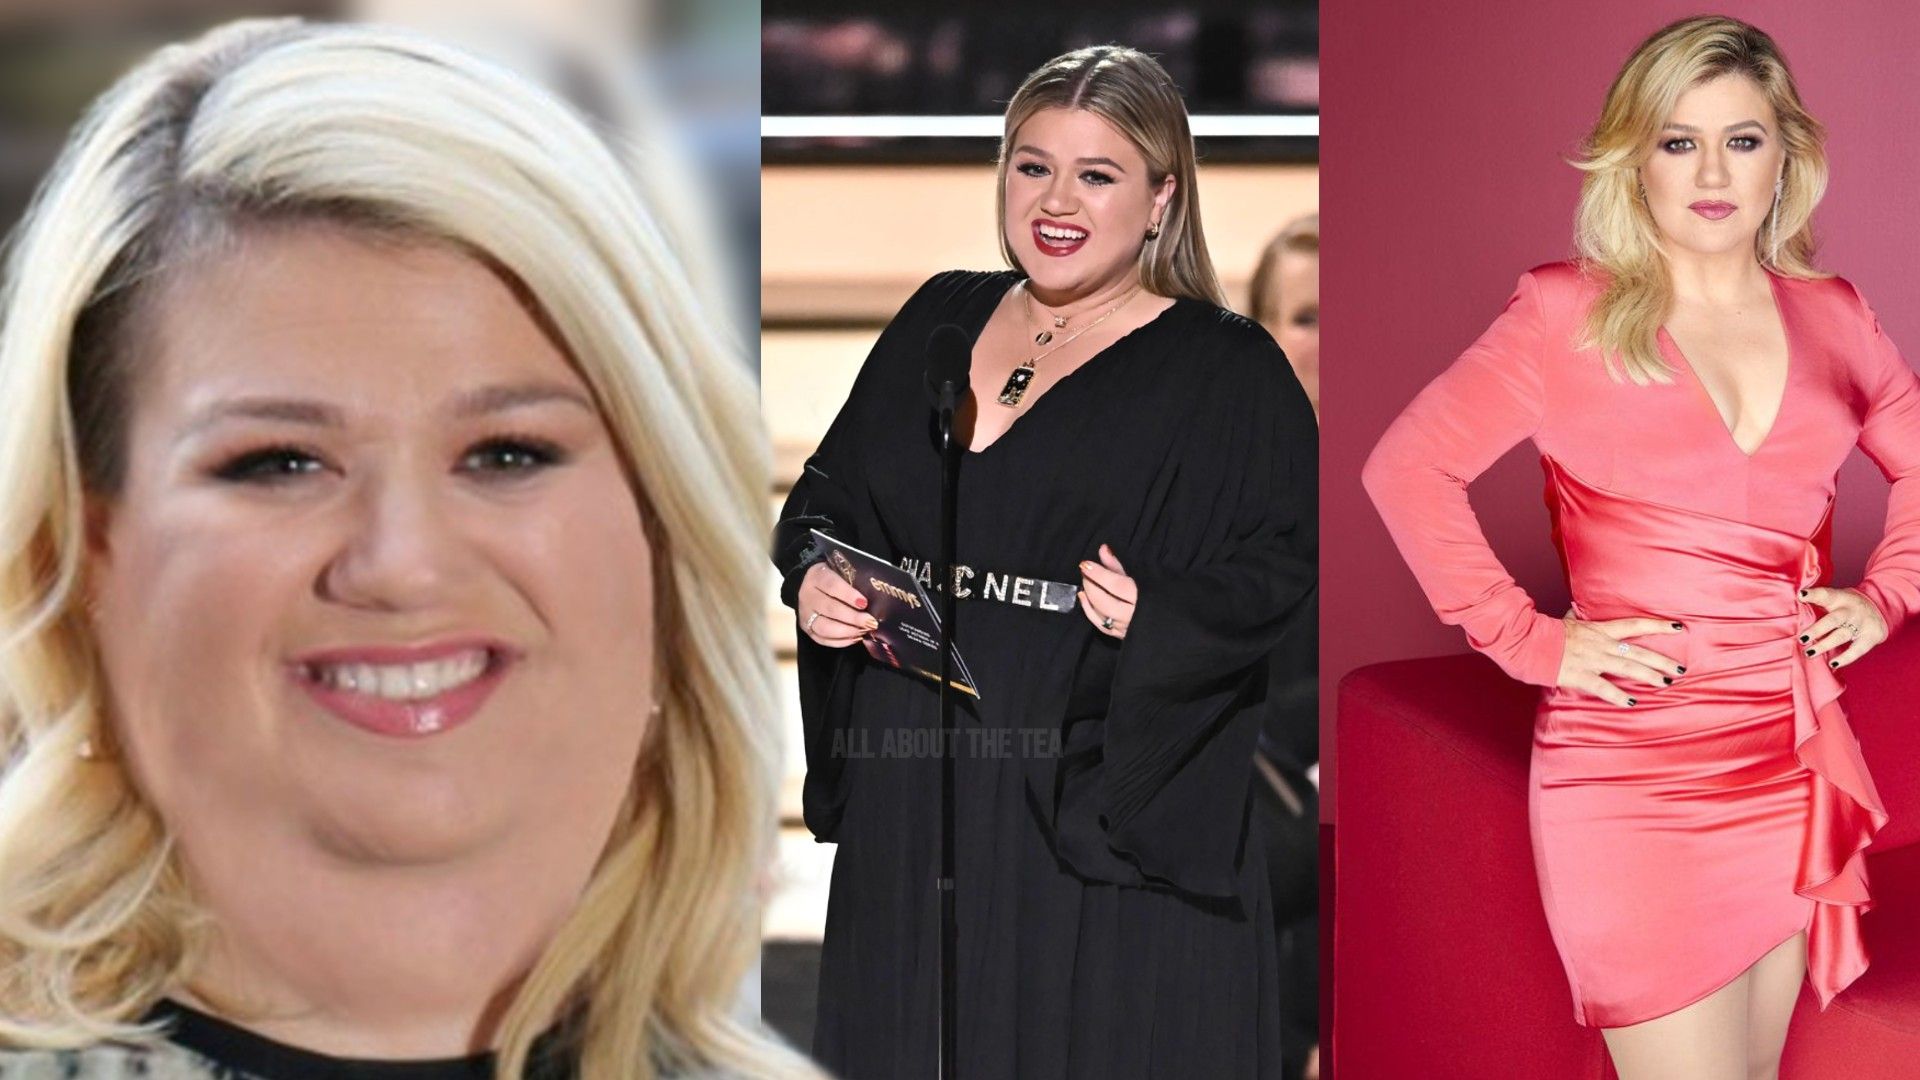 Kelly Clarkson Claims MASSIVE Weight Loss Due to Diet and Exercise, Not